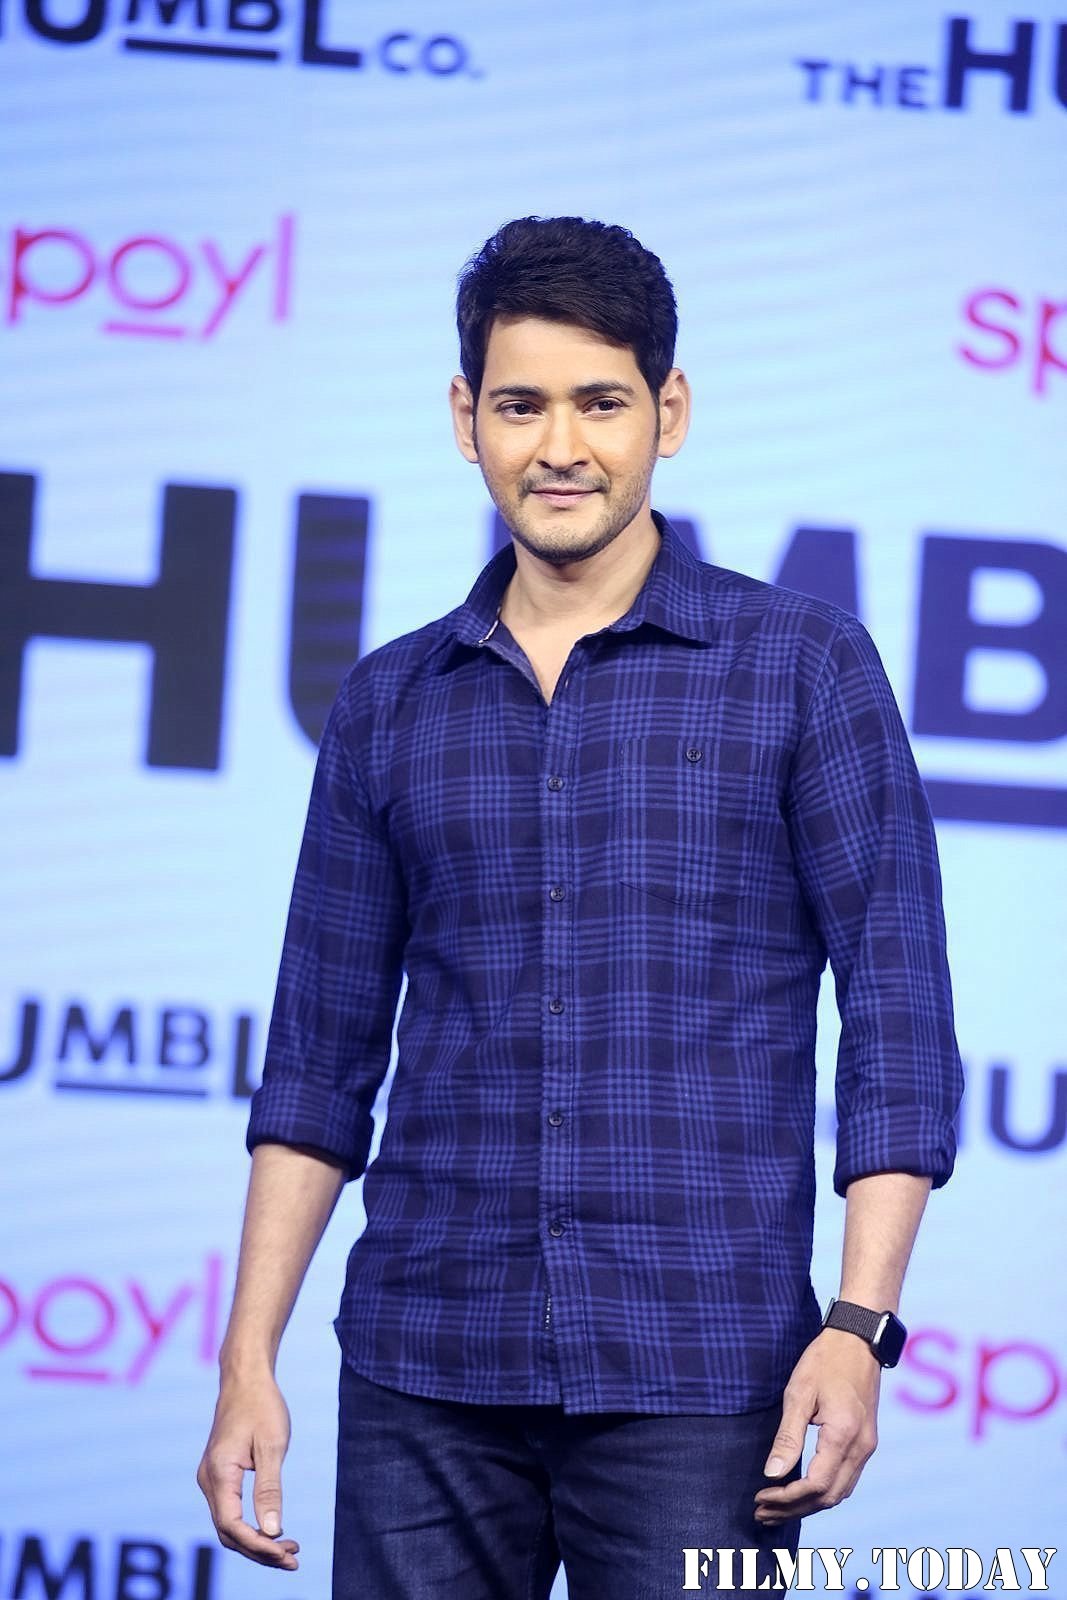 Mahesh Babu - The Humbl Co Clothing Brand Launch Photos | Picture 1673374